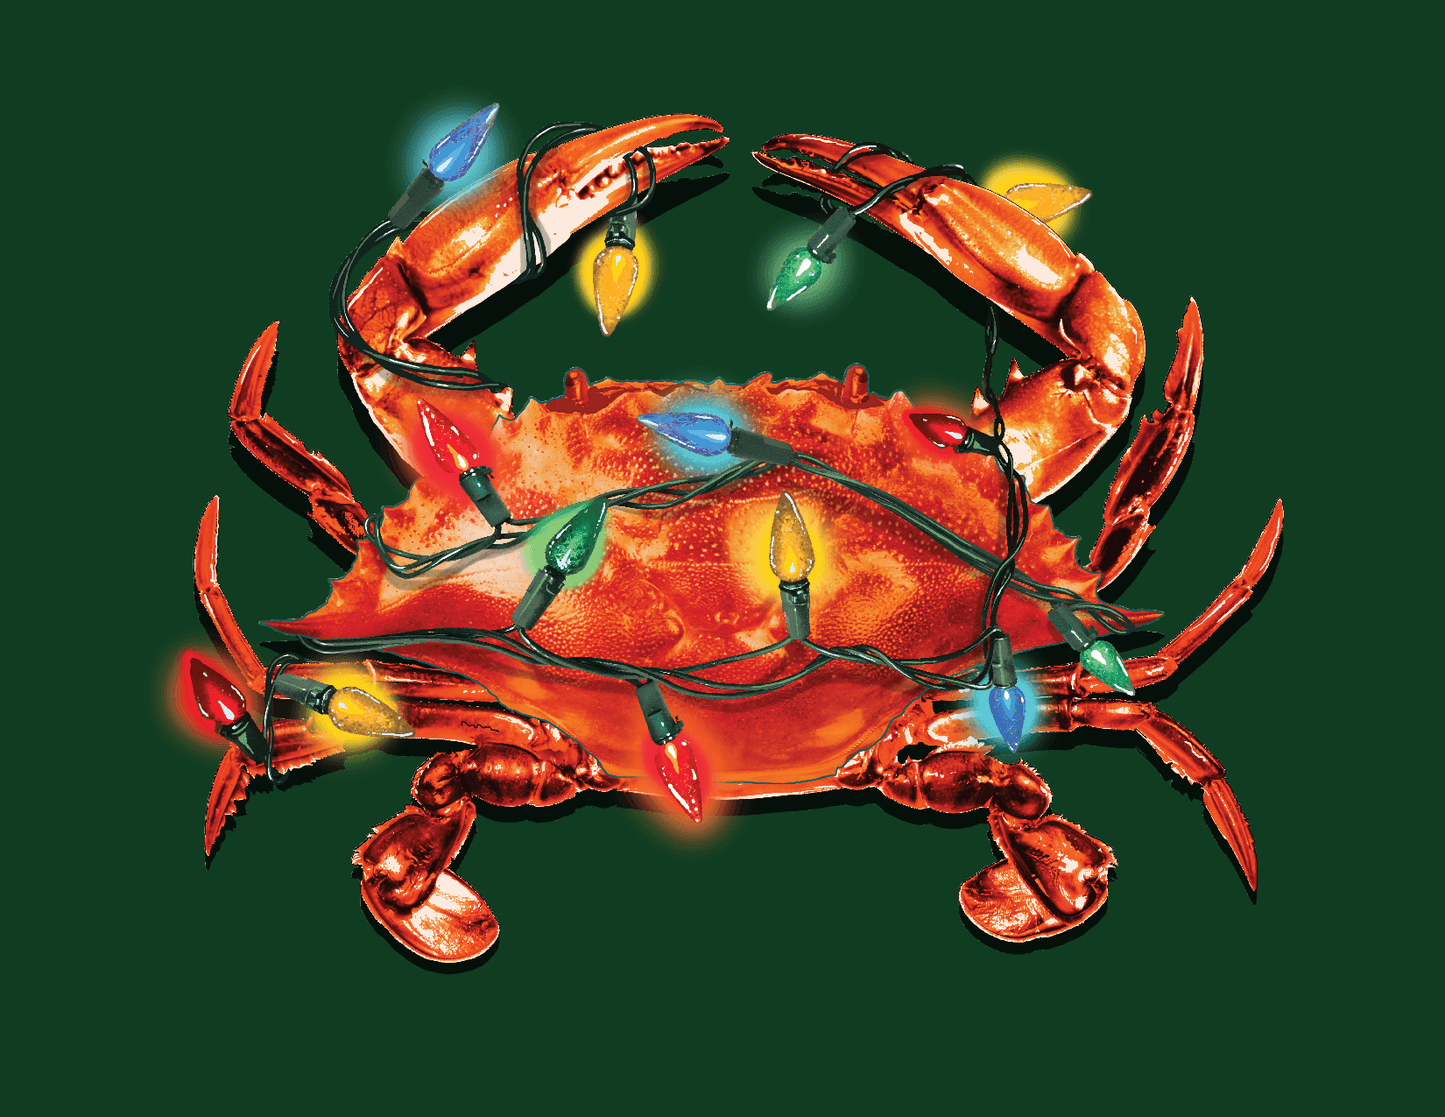 Crab Lights (Green) / Christmas Card - Route One Apparel